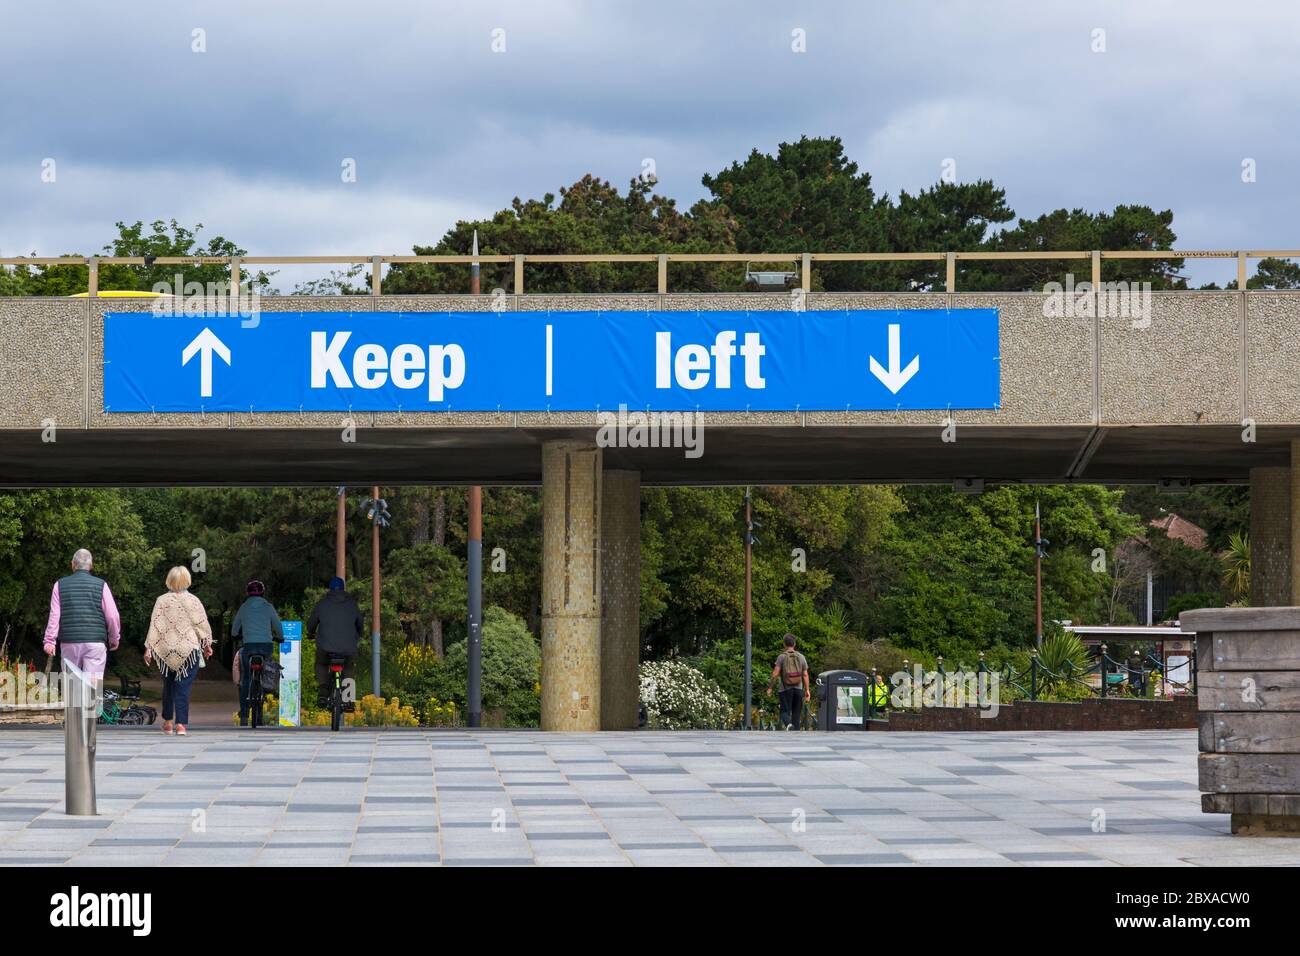 Keep left signs at Pier approach to keep people segregated and going one way as Coronavirus restrictions are eased at Bournemouth, Dorset UK in June Stock Photo